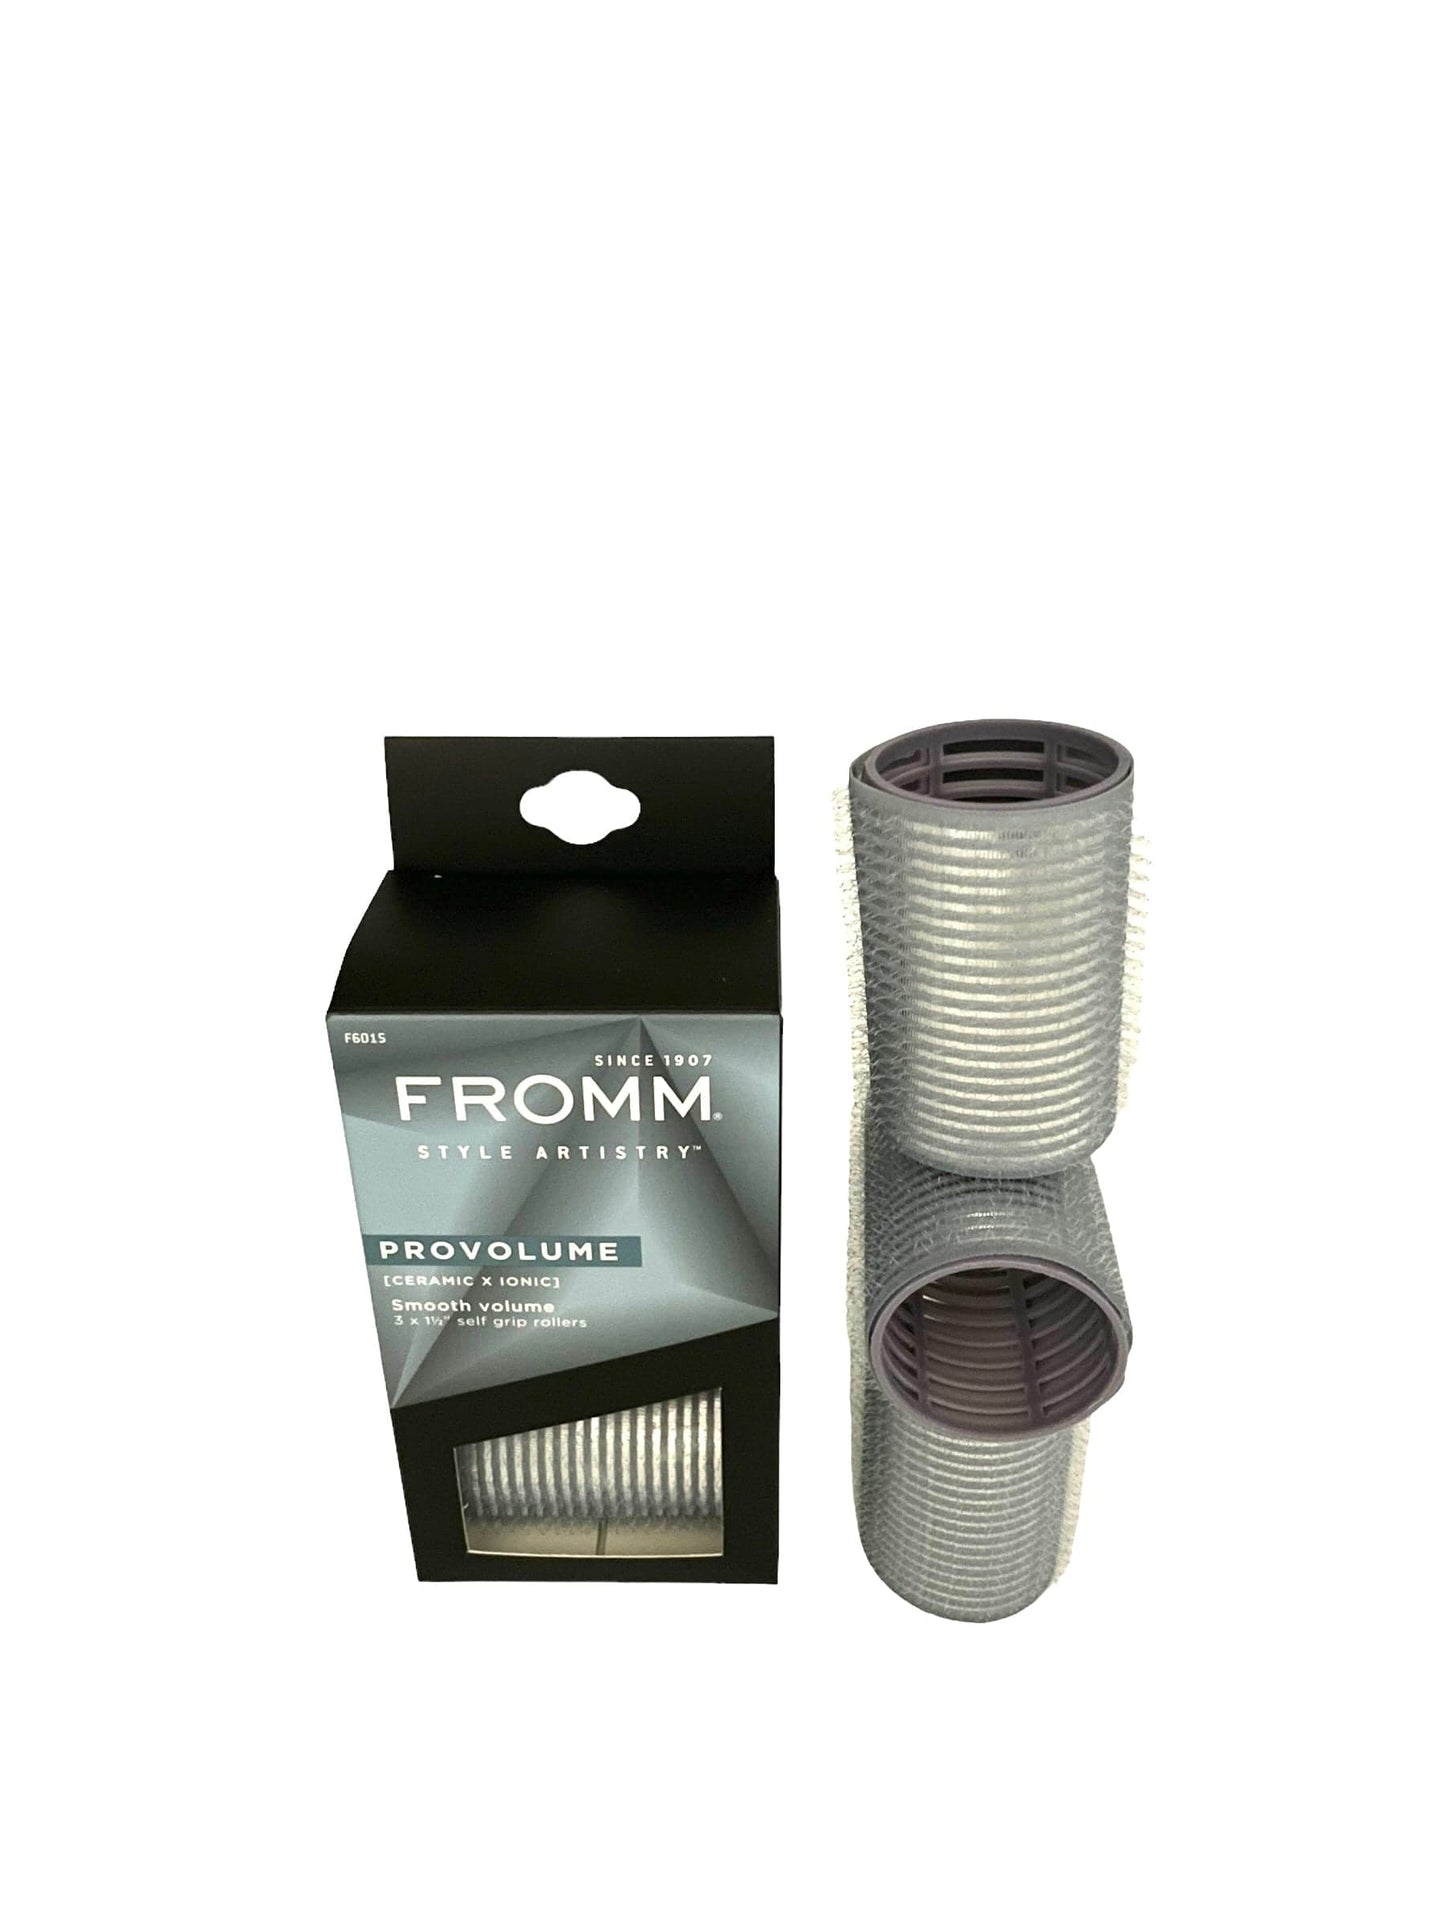 Fromm Pro Volume Ceramic Ionic Hair Rollers Self Grip 3 Sizes Hair Rollers